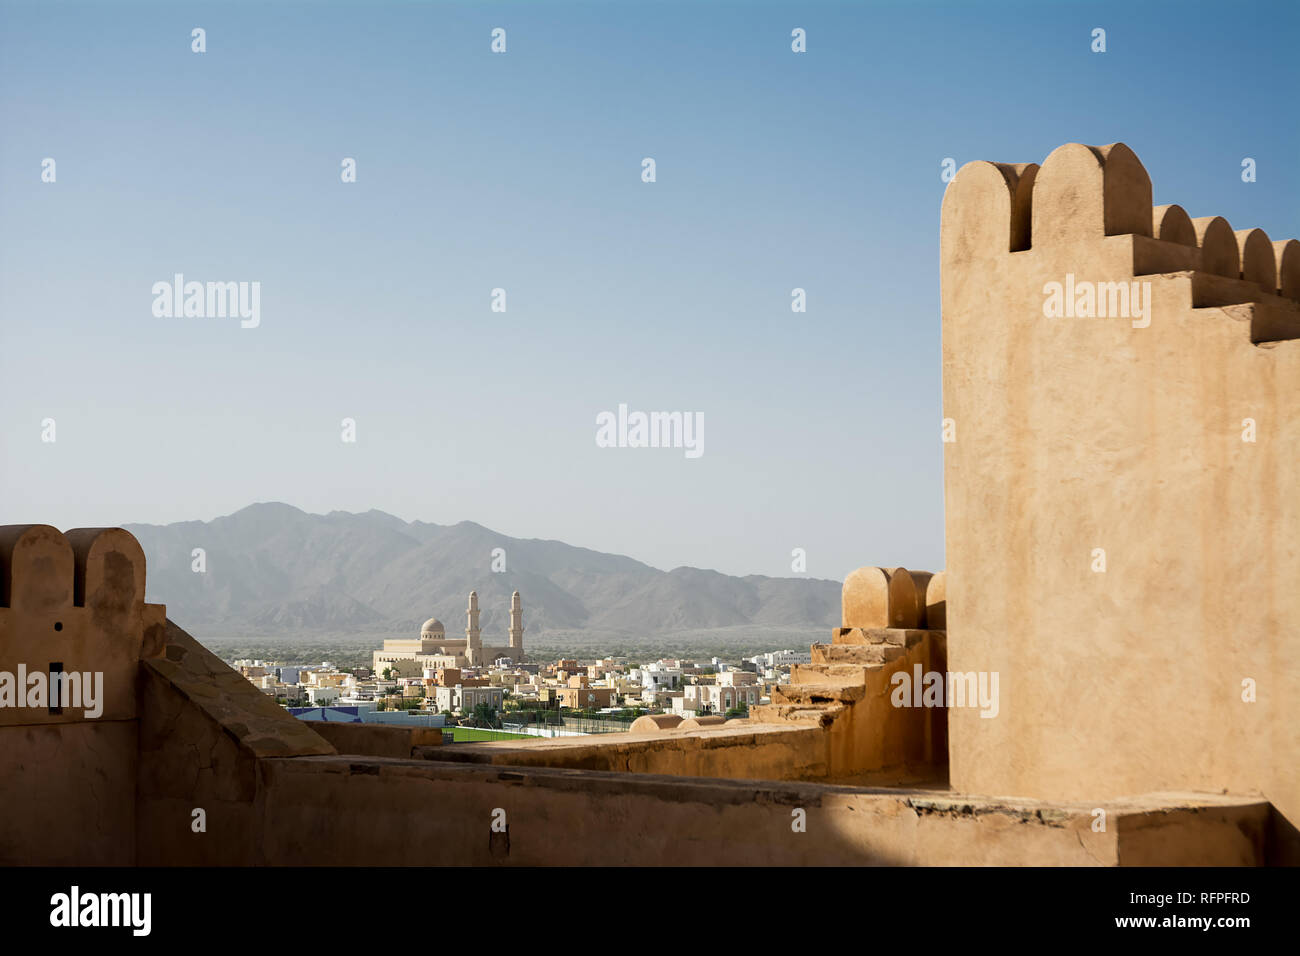 Nakhal Mosquea seen from the crenellated walls of the fort (Oman) Stock Photo